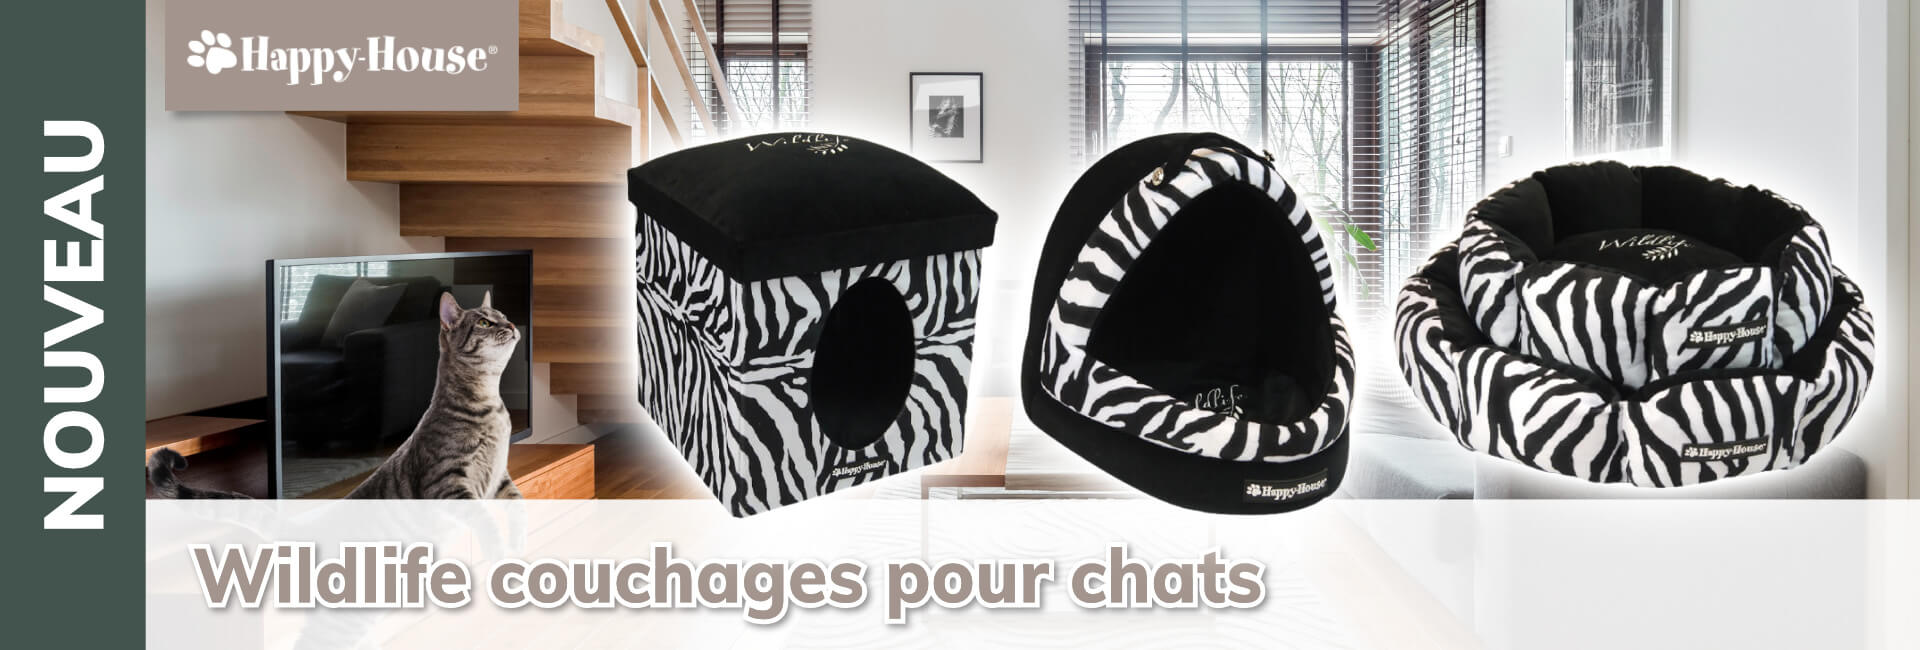 Happy-House Wildlife couchages pour chats